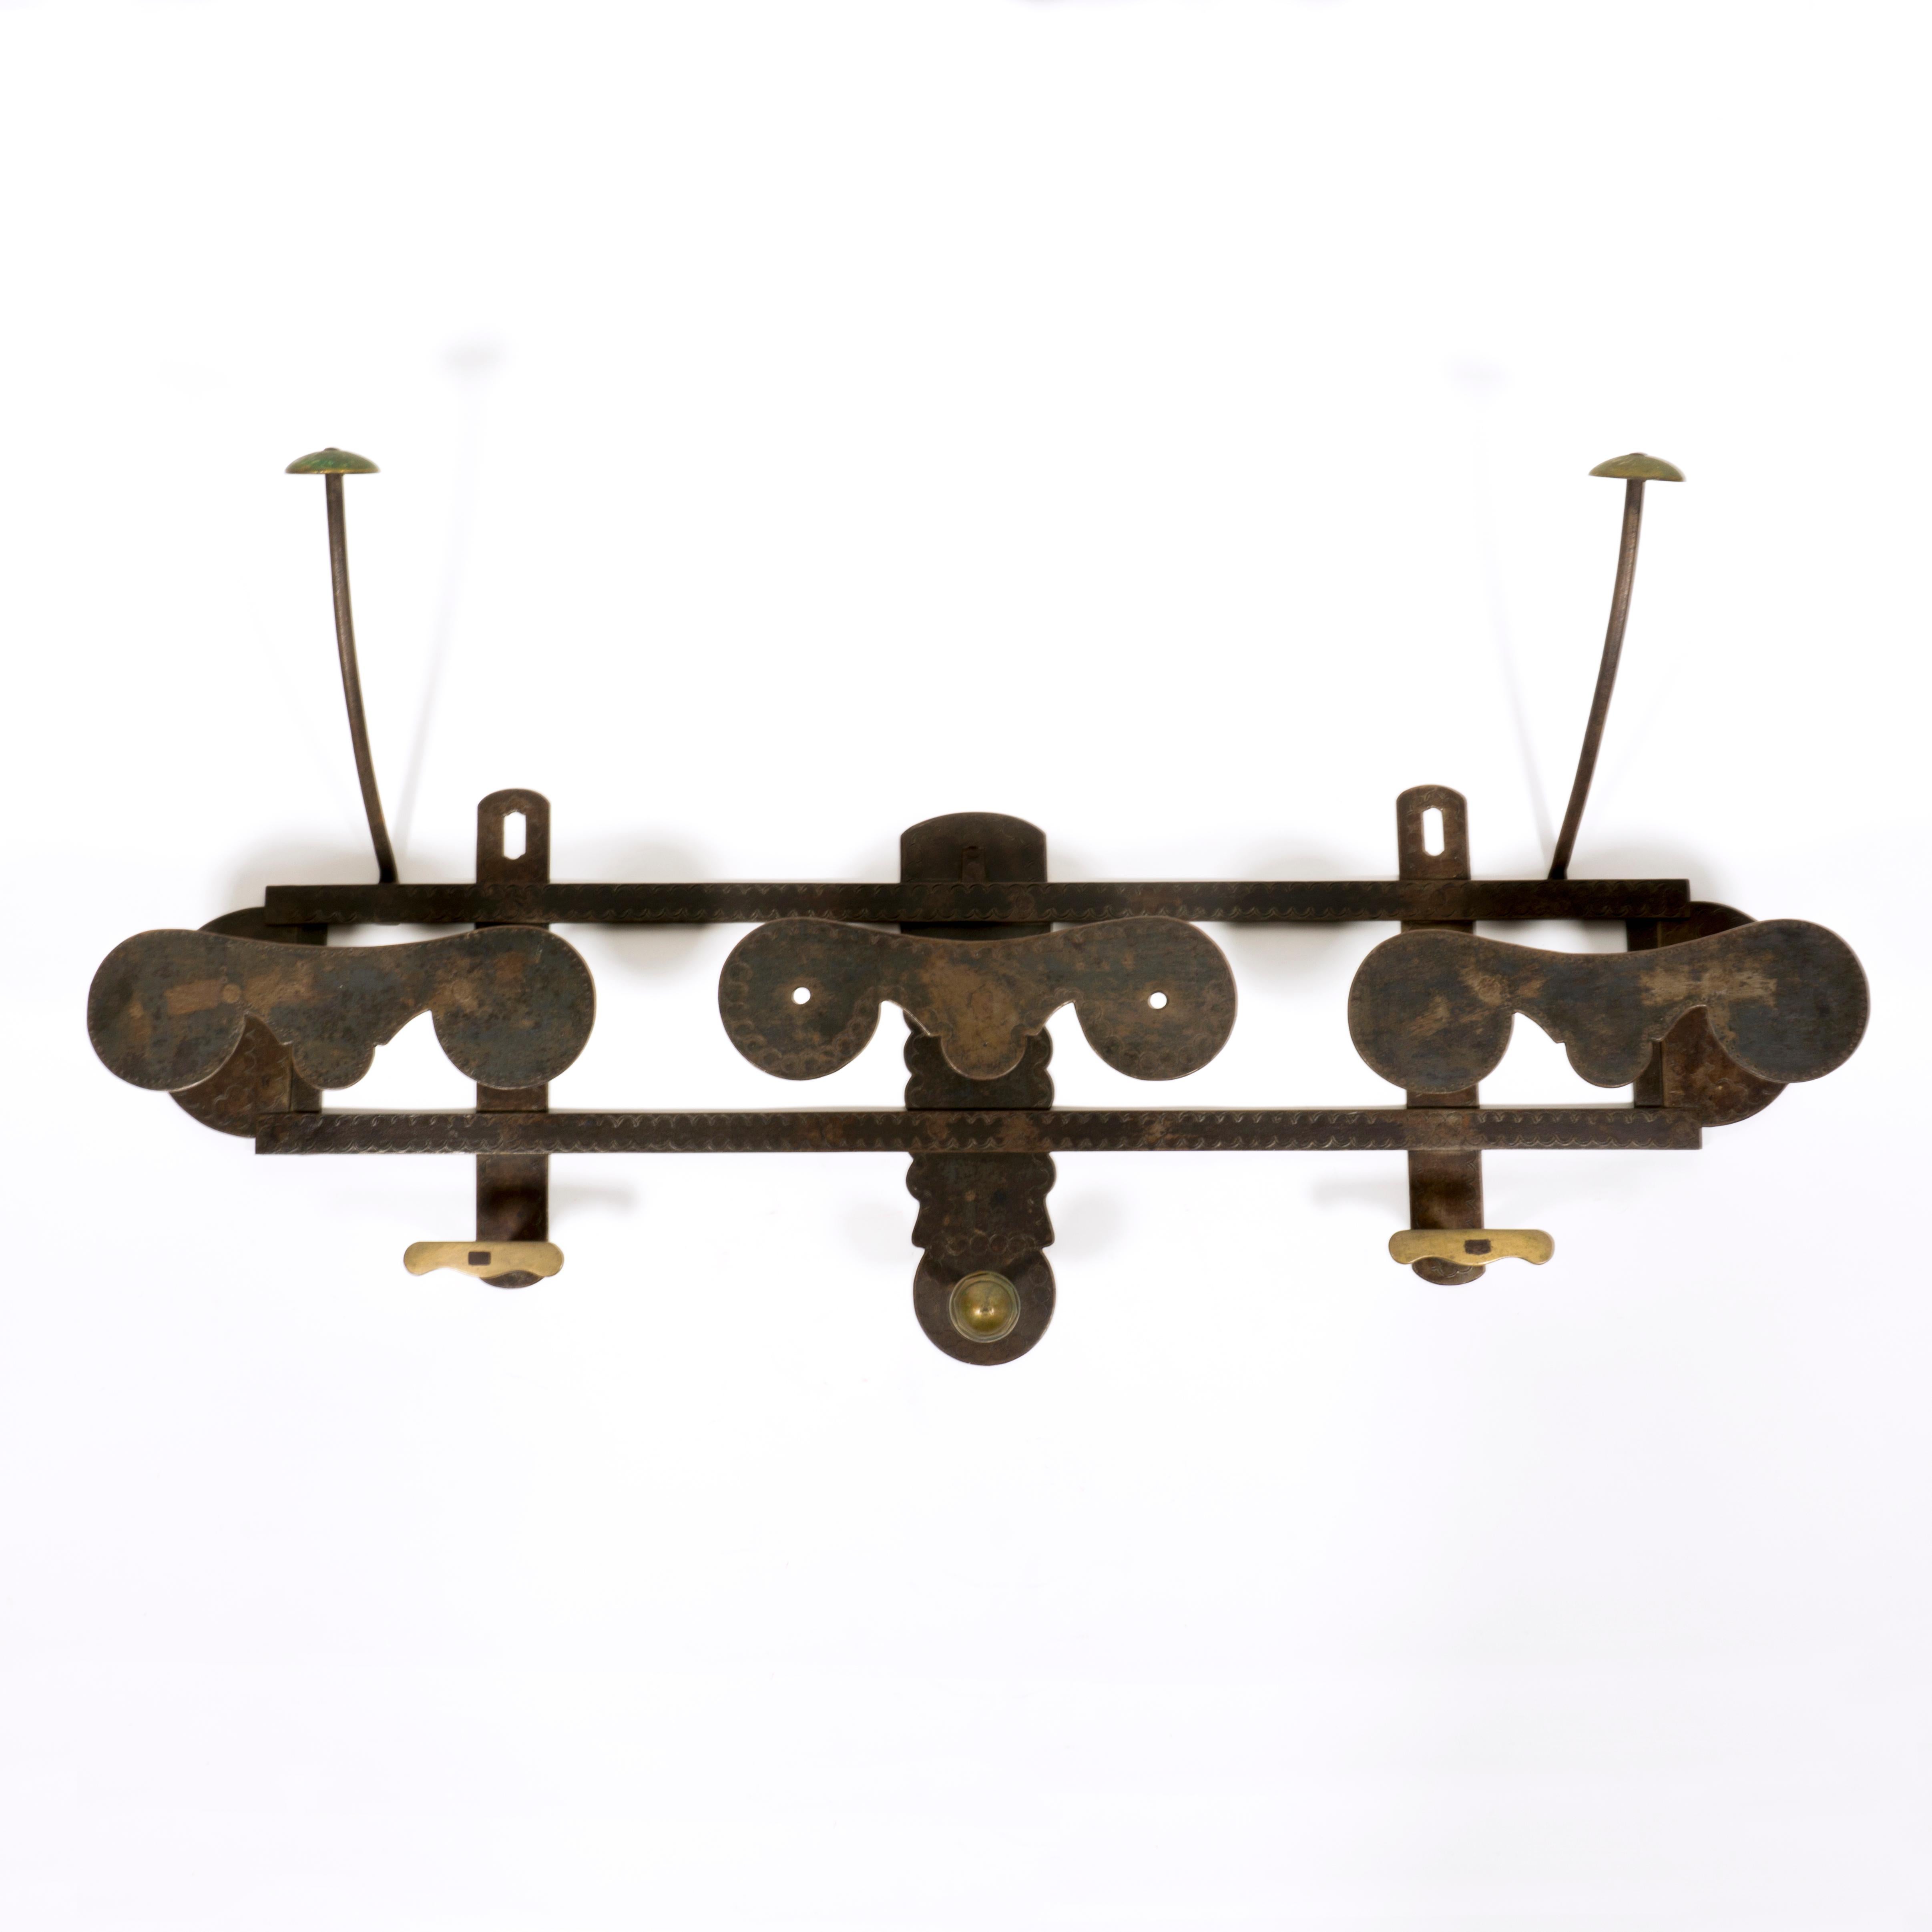 Embossed Large embossed Iron and Brass Vintage Wall Mounted Coat Rack from Italy 